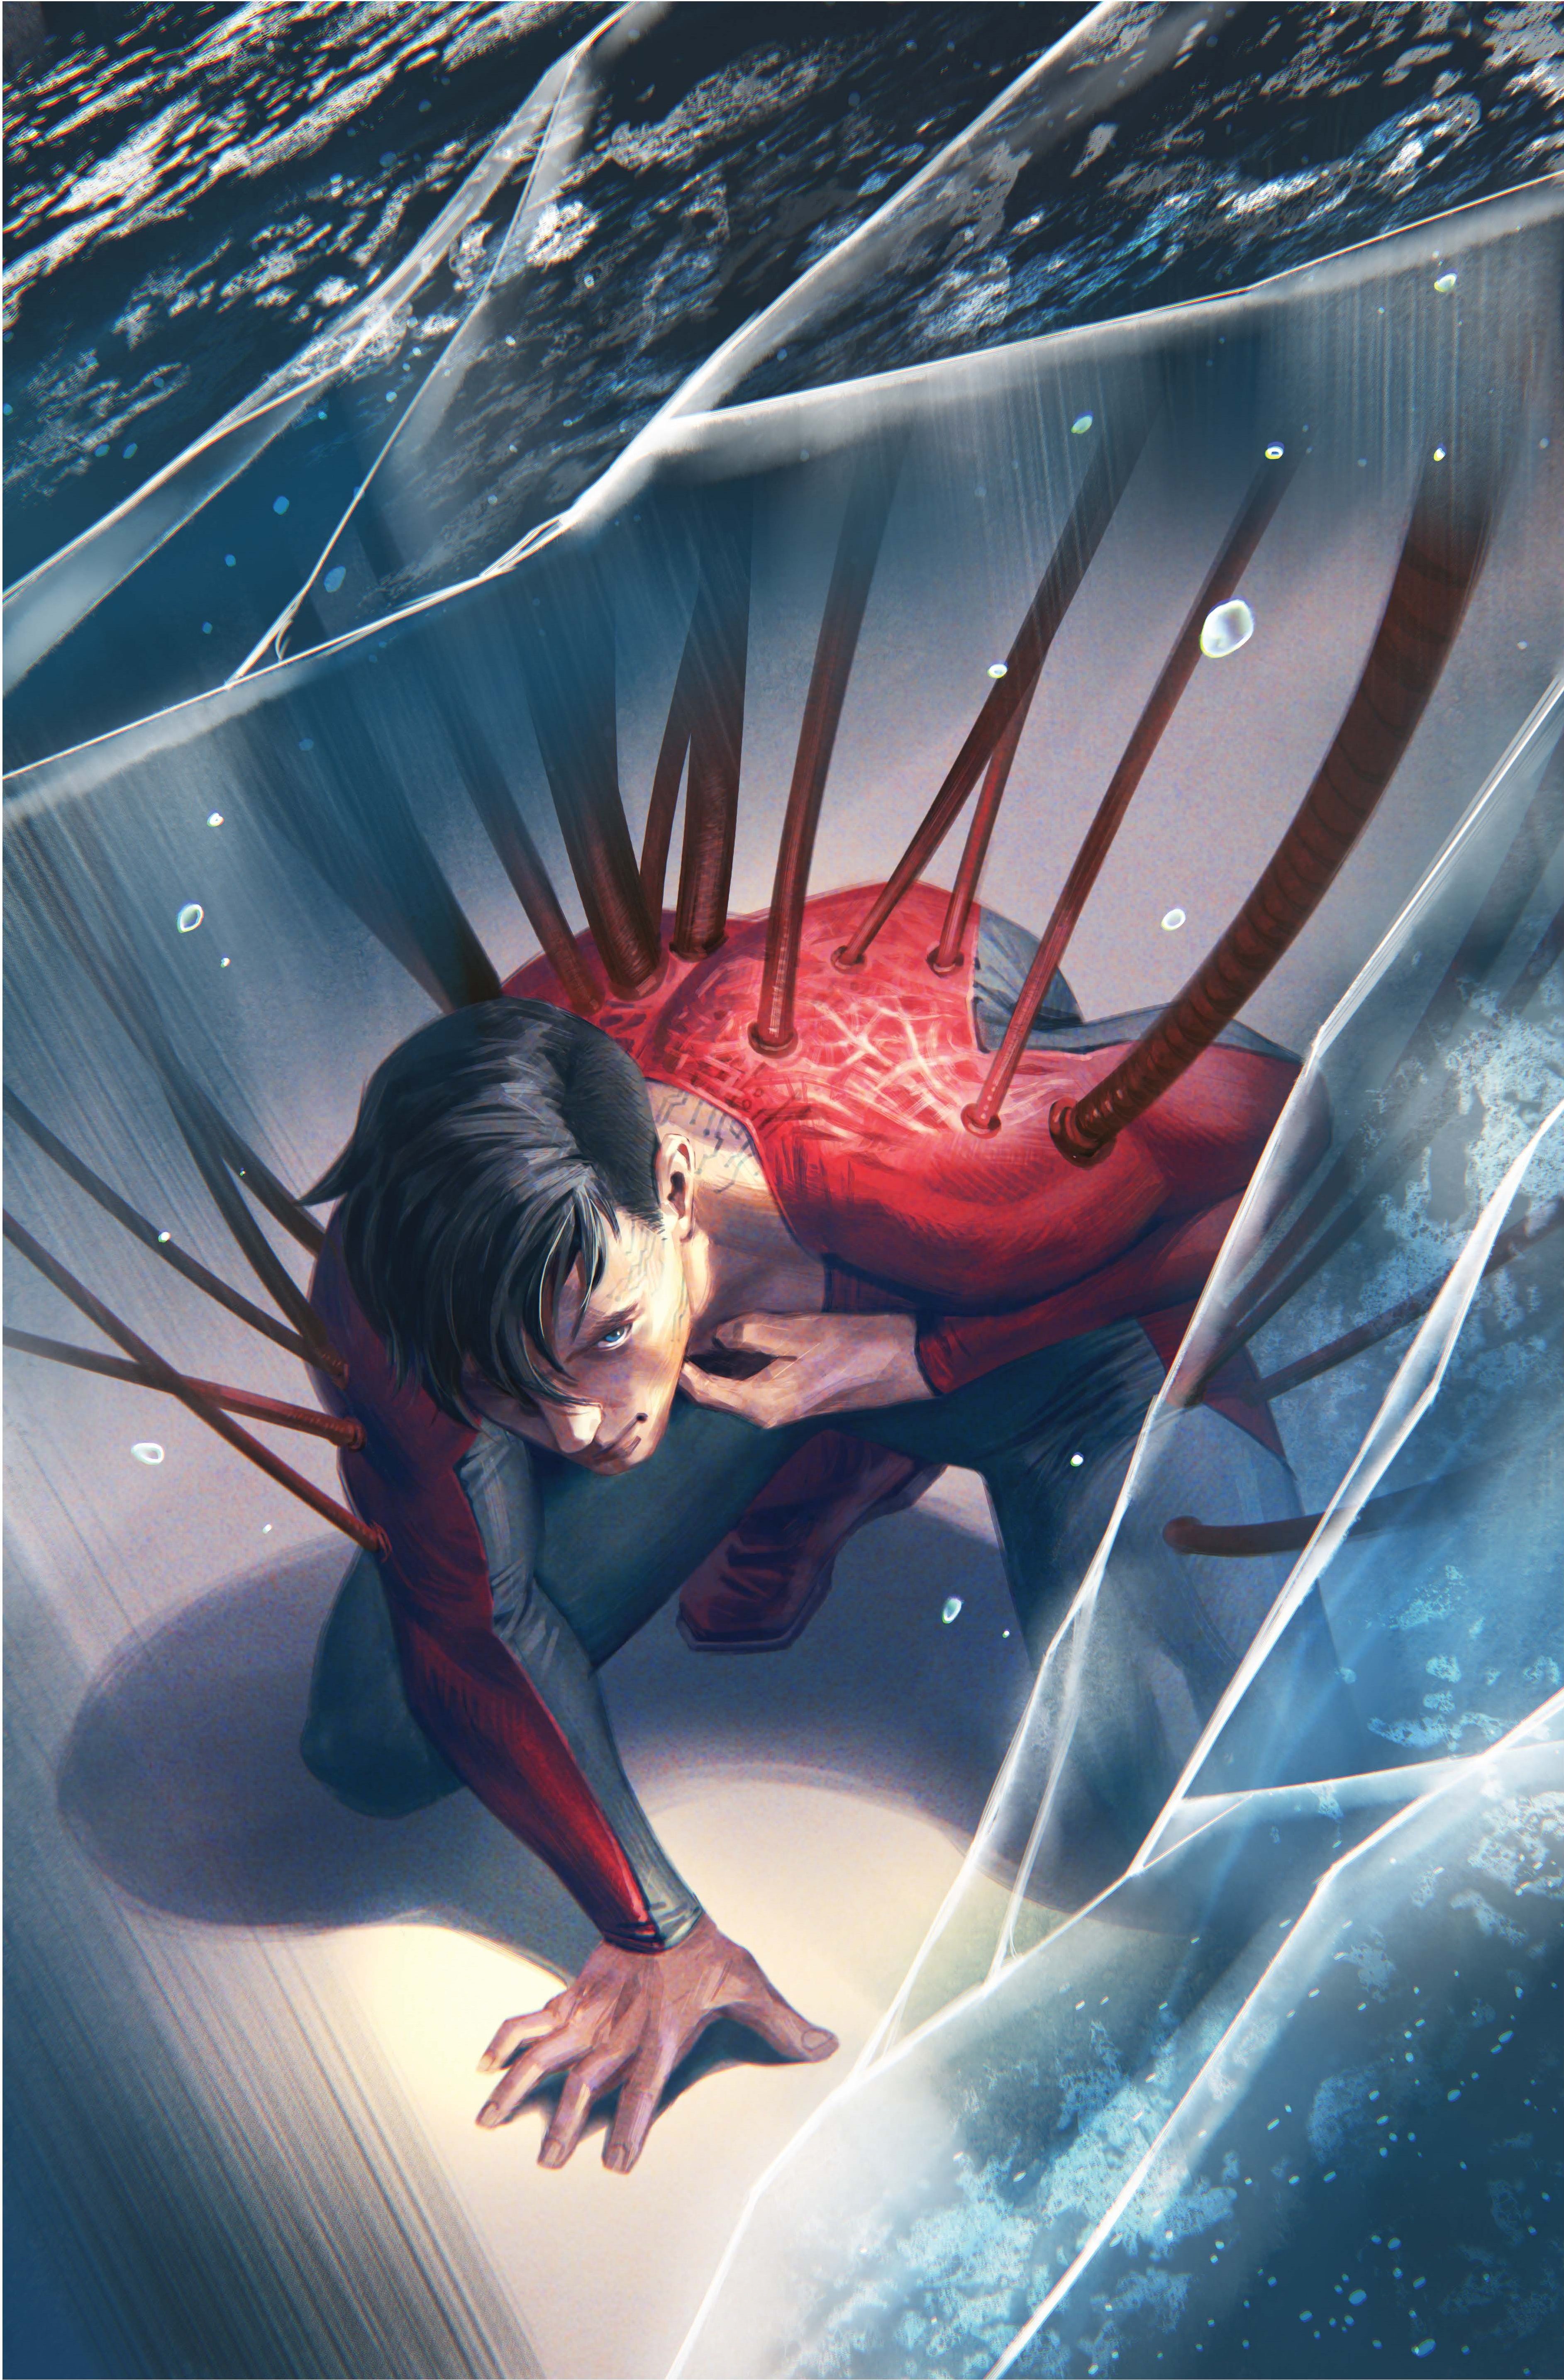 Absolute Power Super Son 1 Murakami Variant Cover: Jon Kent hooked up to wires, crouched in pain.